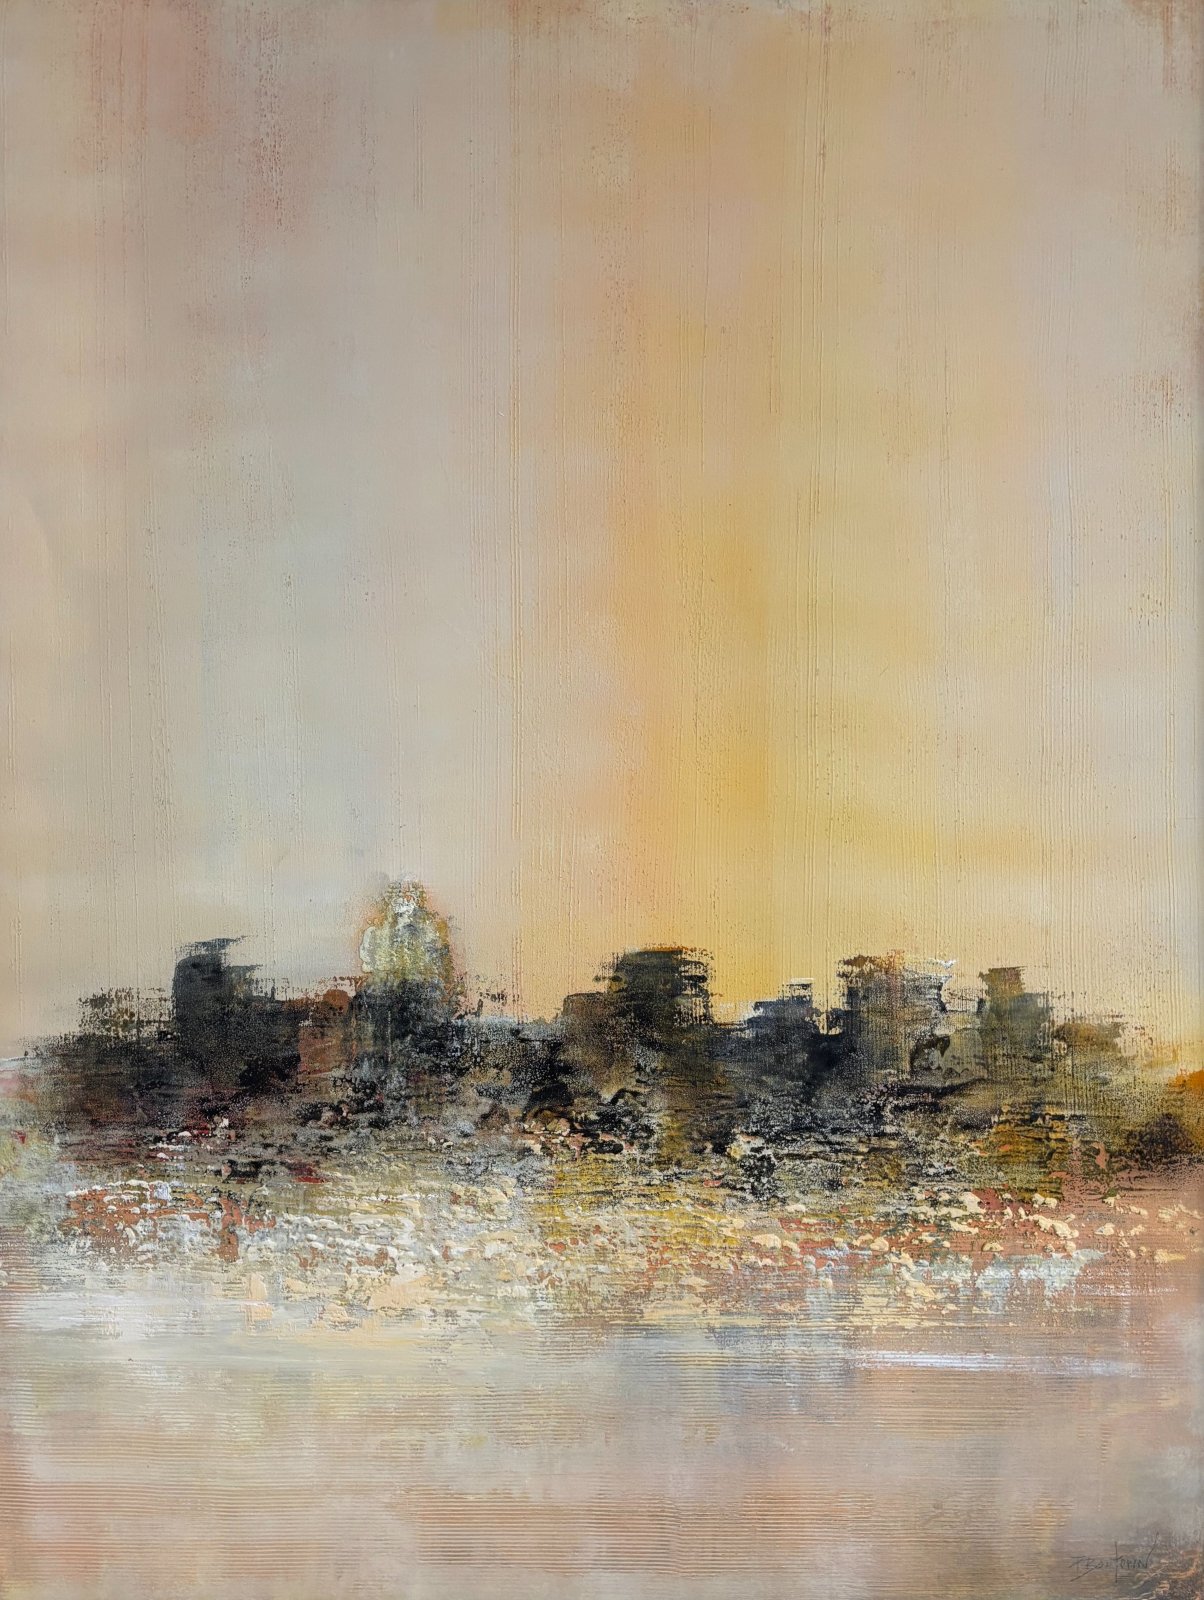 Hampi by Pascal Bouterin at LePrince Galleries